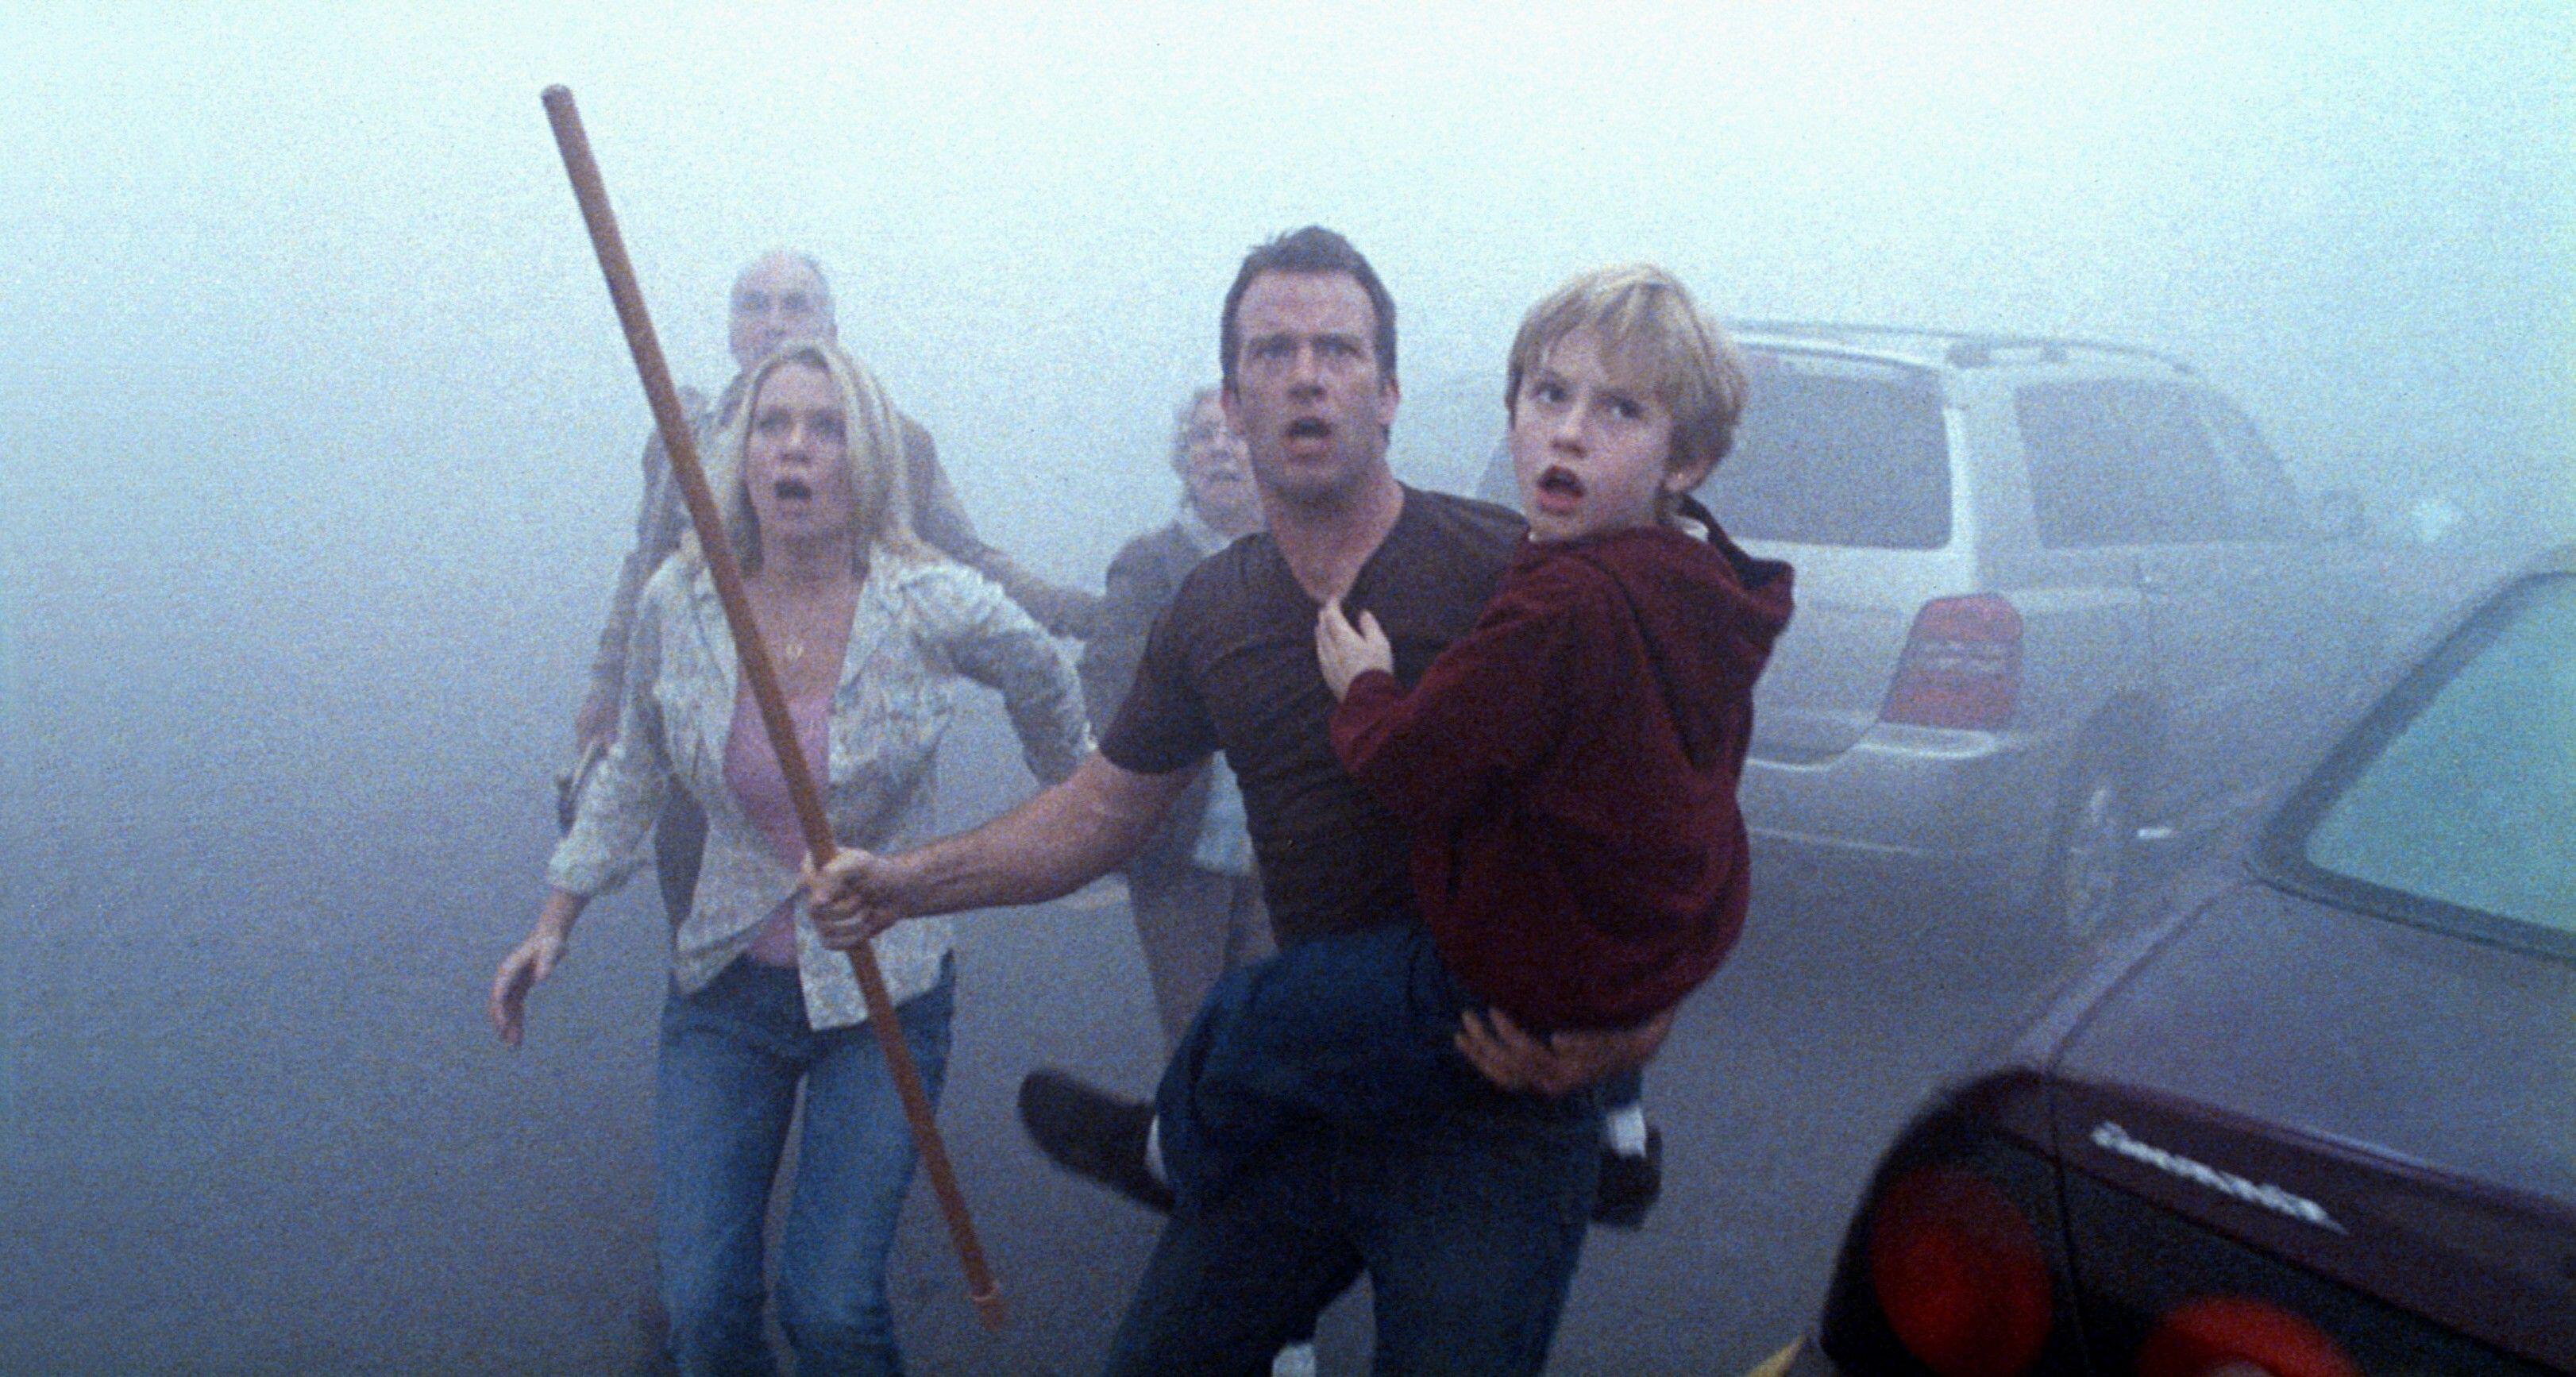 (L to R) Laurie Holden as Amanda, and Thomas Jane as David in The Mist, showing concern, in The Mist (2007)